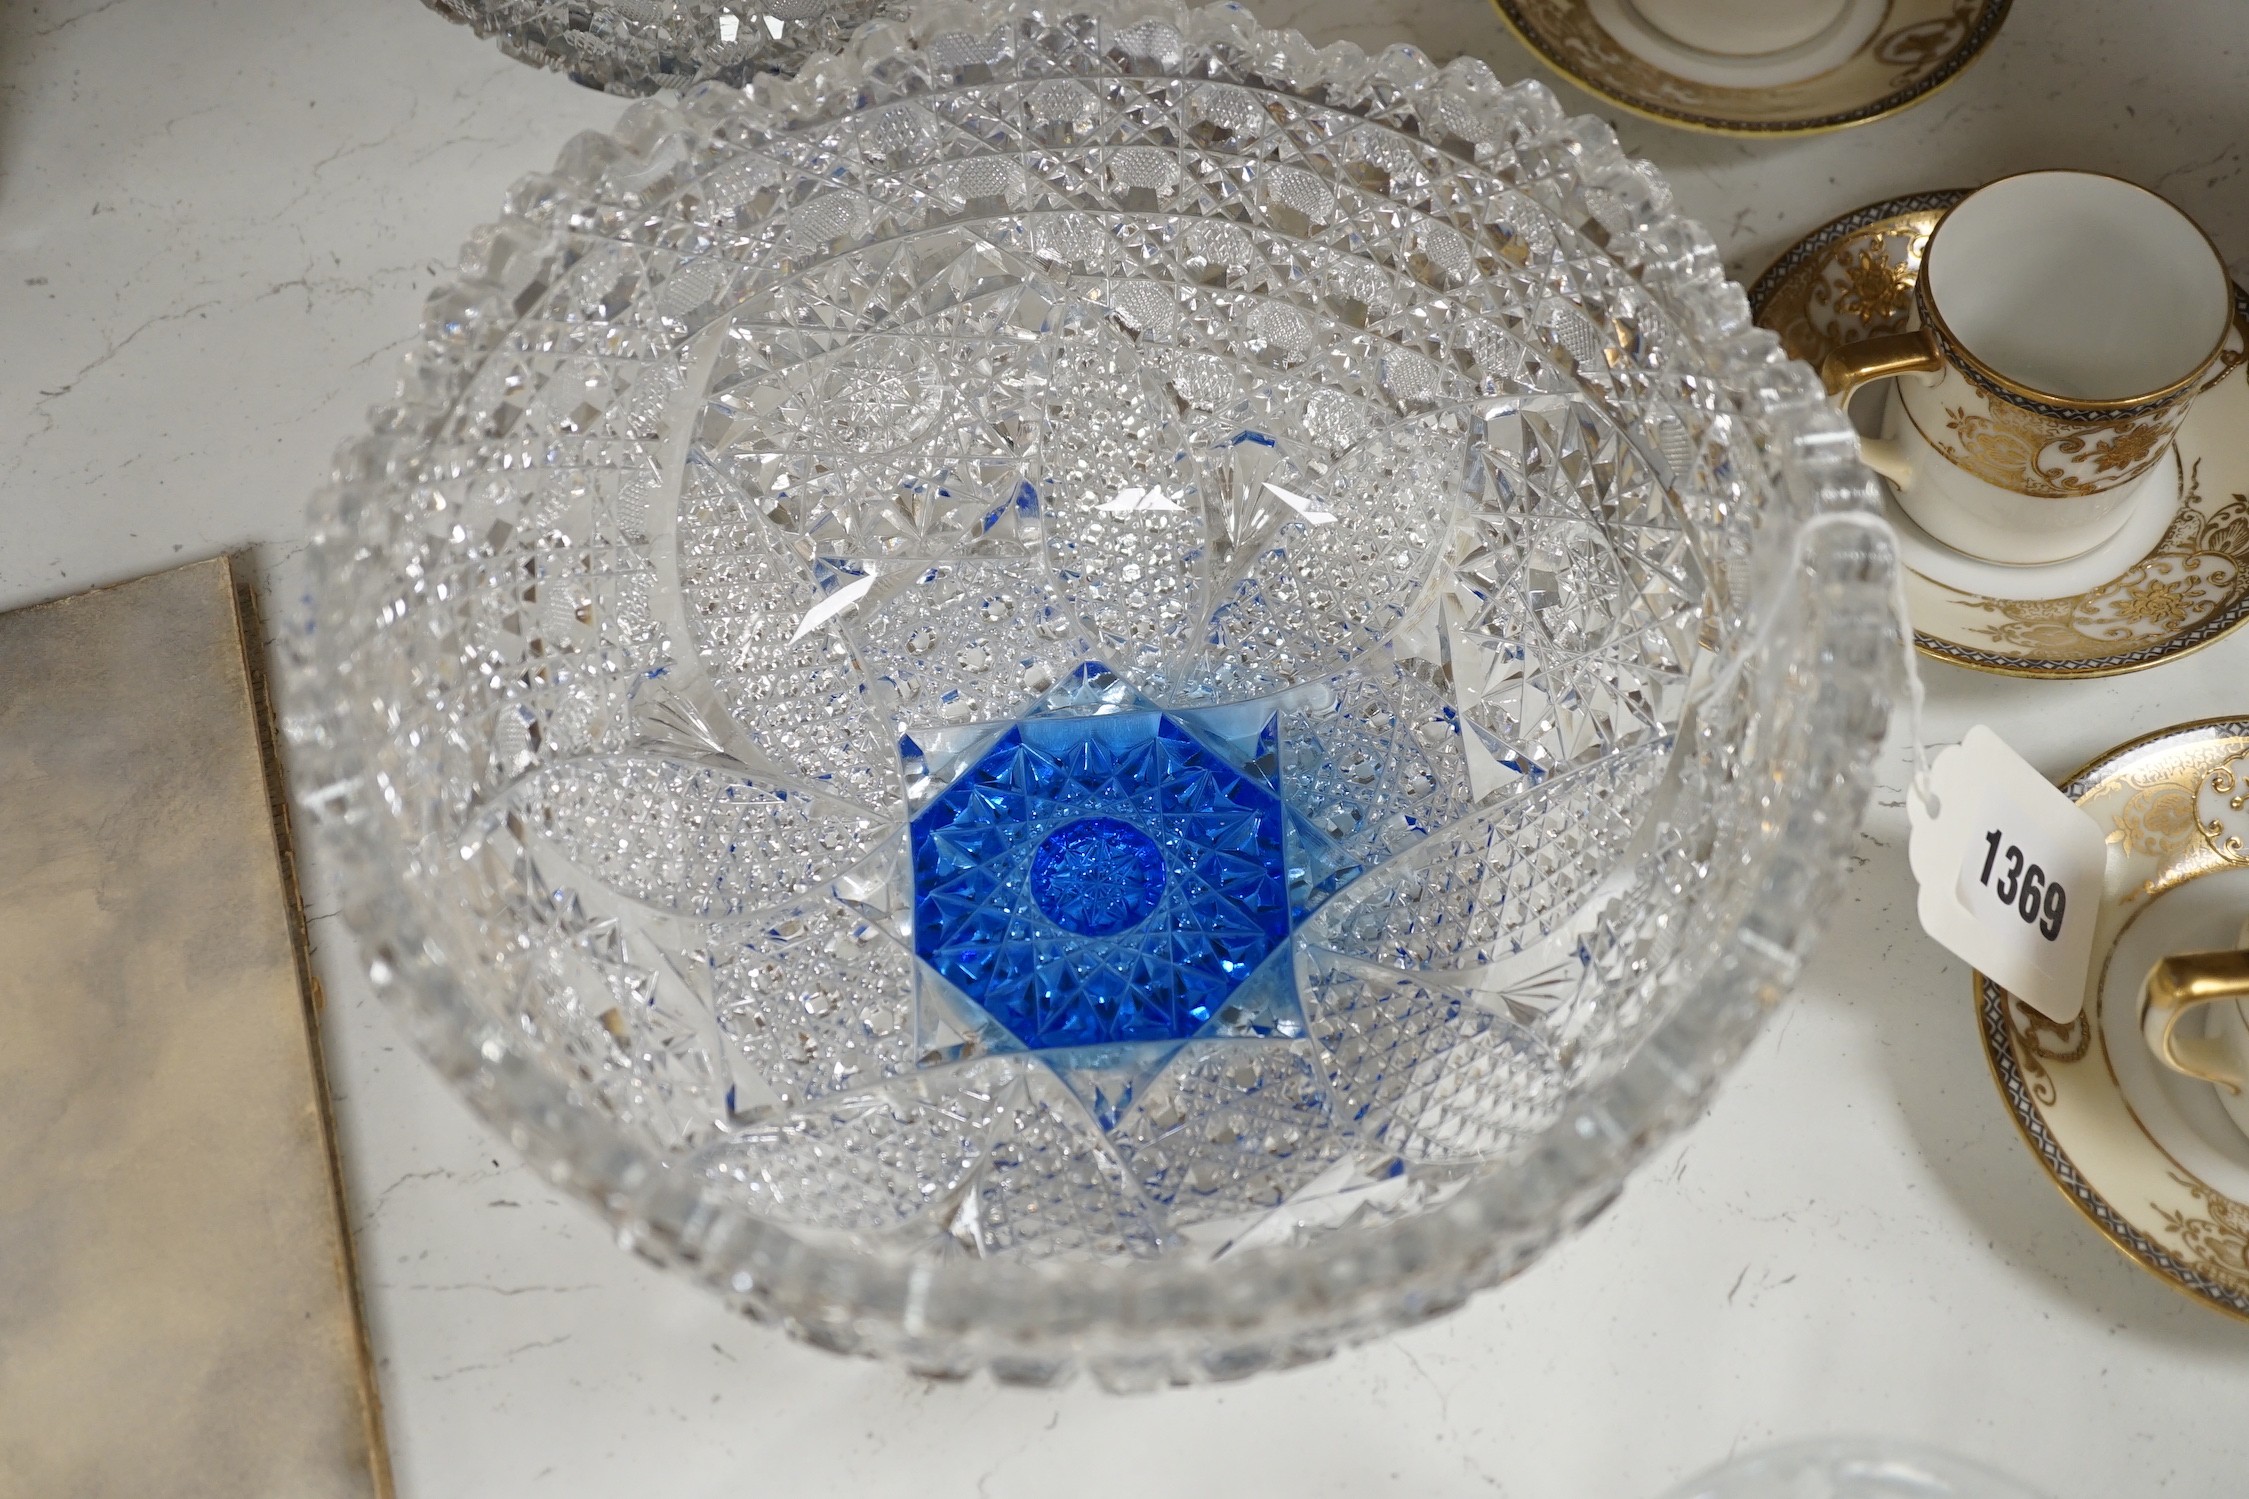 A Pair of Bohemian or Czech heavy cuts glass fruit bowls with blue flashed centres, 22.5 cm diameter, two decanters and six tumblers.